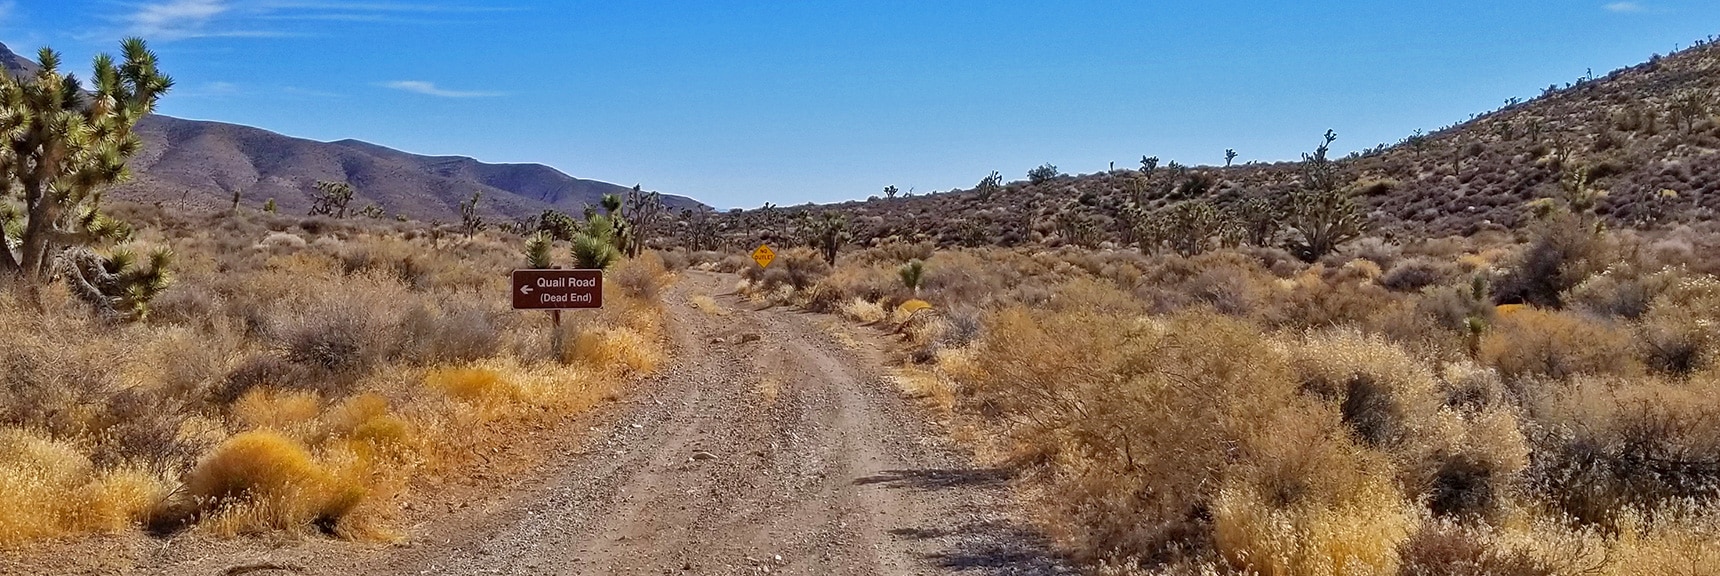 Quail Road Turnoff from Gass Peak Road. All Roads Say "No Outlet" | Gass Peak Road Circuit | Desert National Wildlife Refuge | Nevada